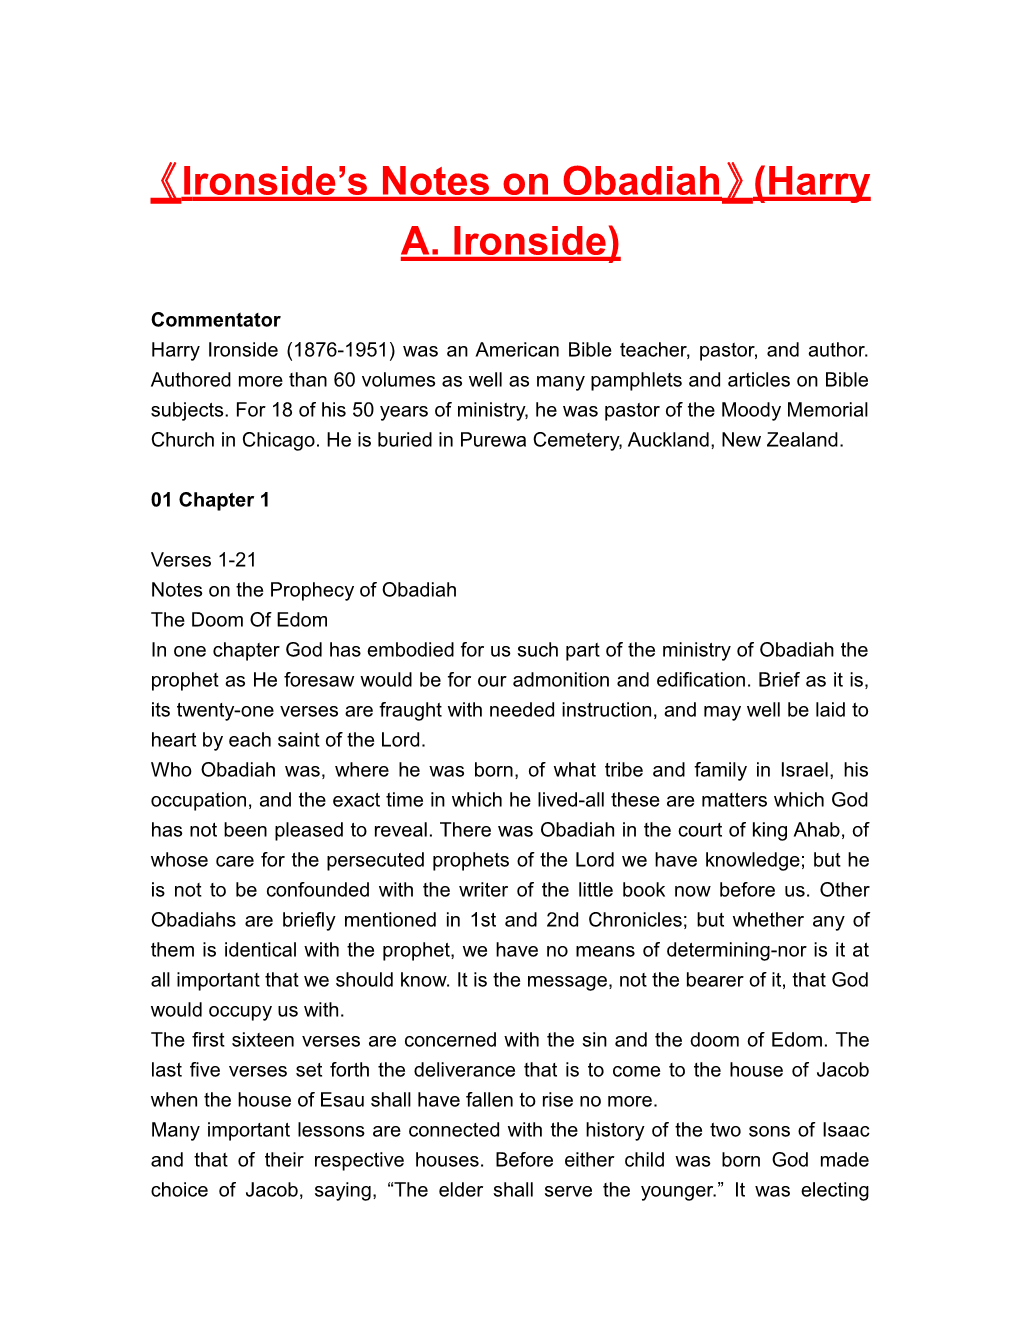 Ironside S Notes on Obadiah (Harry A. Ironside)